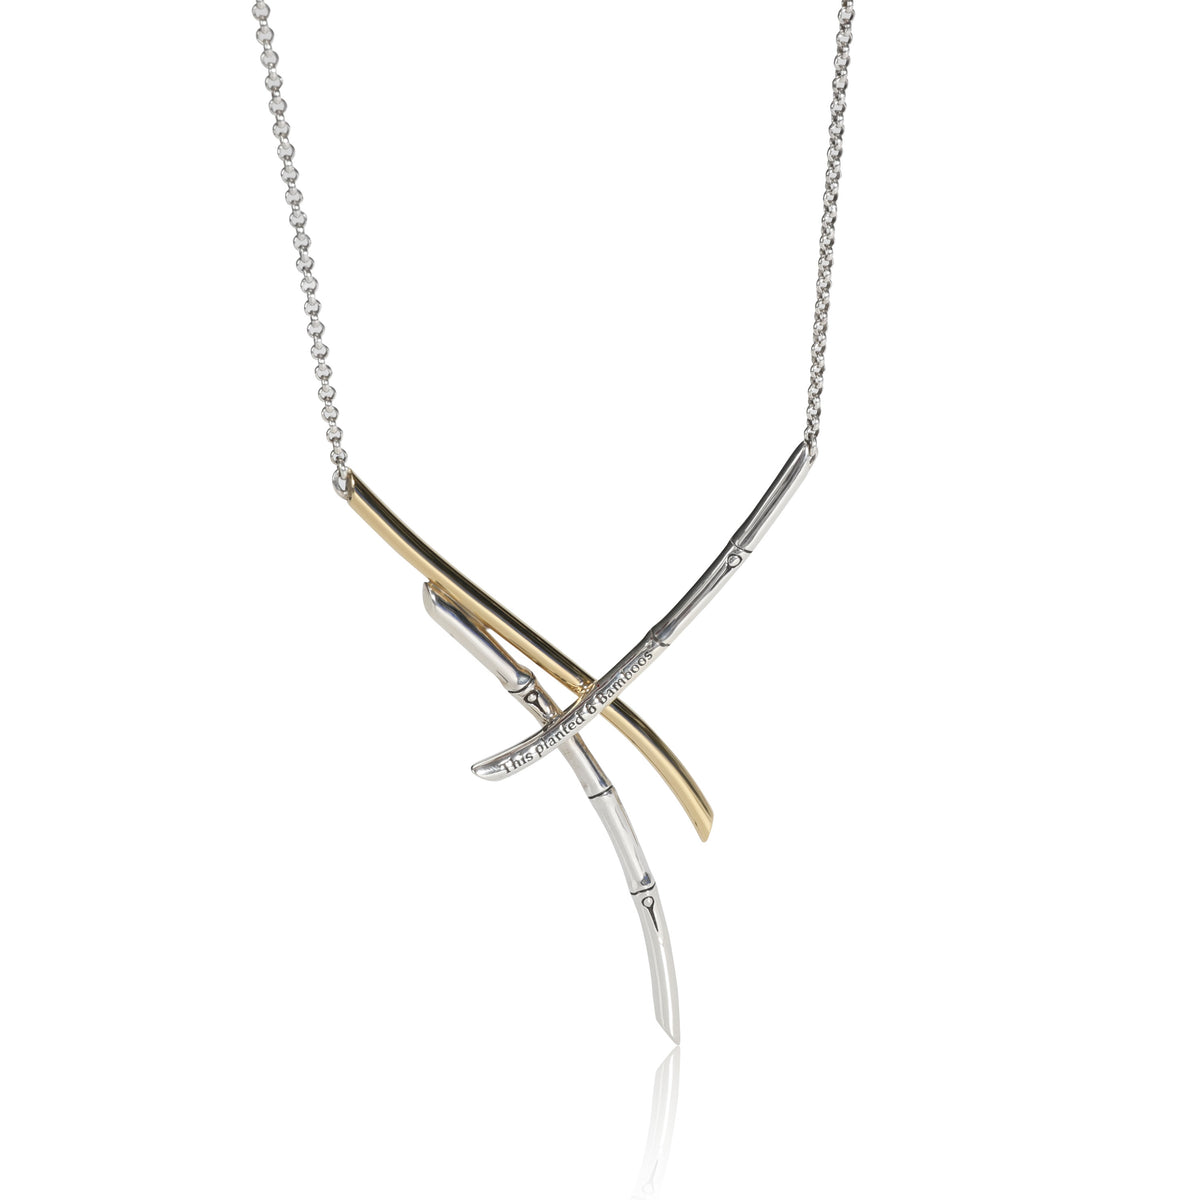 John Hardy Bamboo Fashion Necklace in 18K Yellow Gold/Sterling Silver